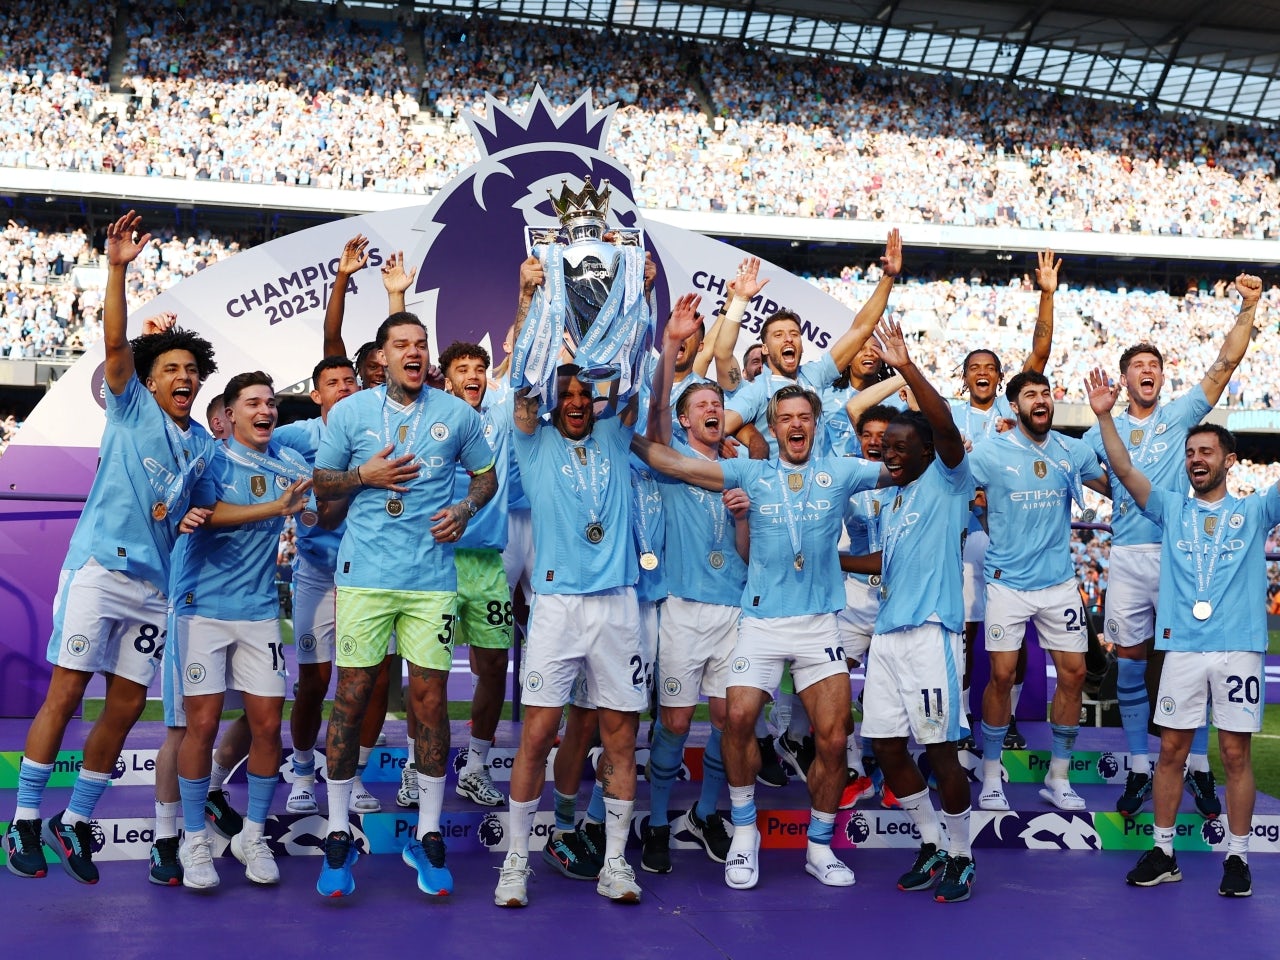 Four in a row: Manchester City crowned Premier League champions again with victory over West Ham United